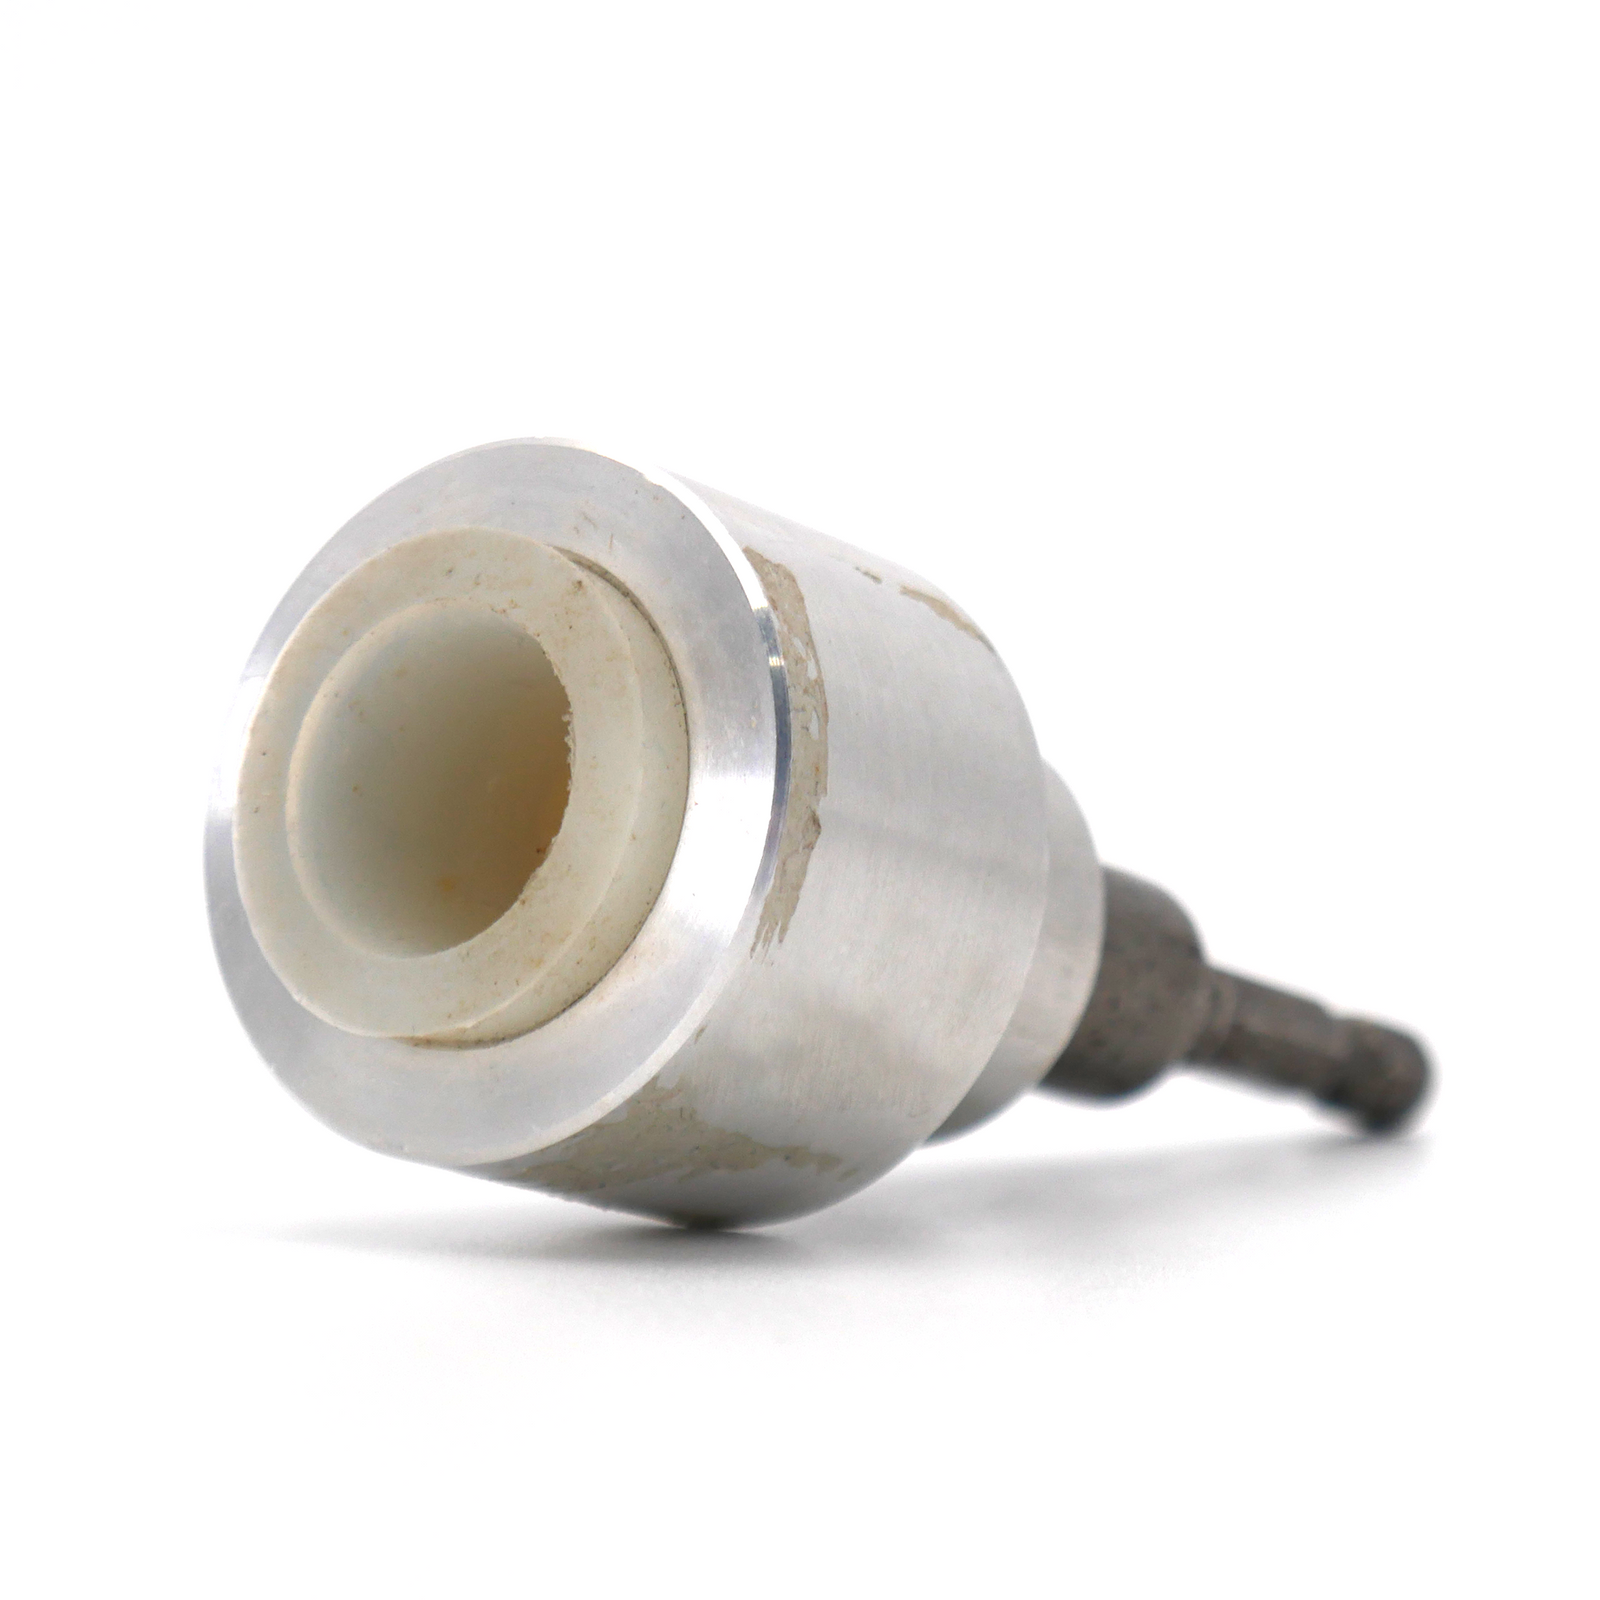 Metal capping chuck size 25 compatible with manual cappers